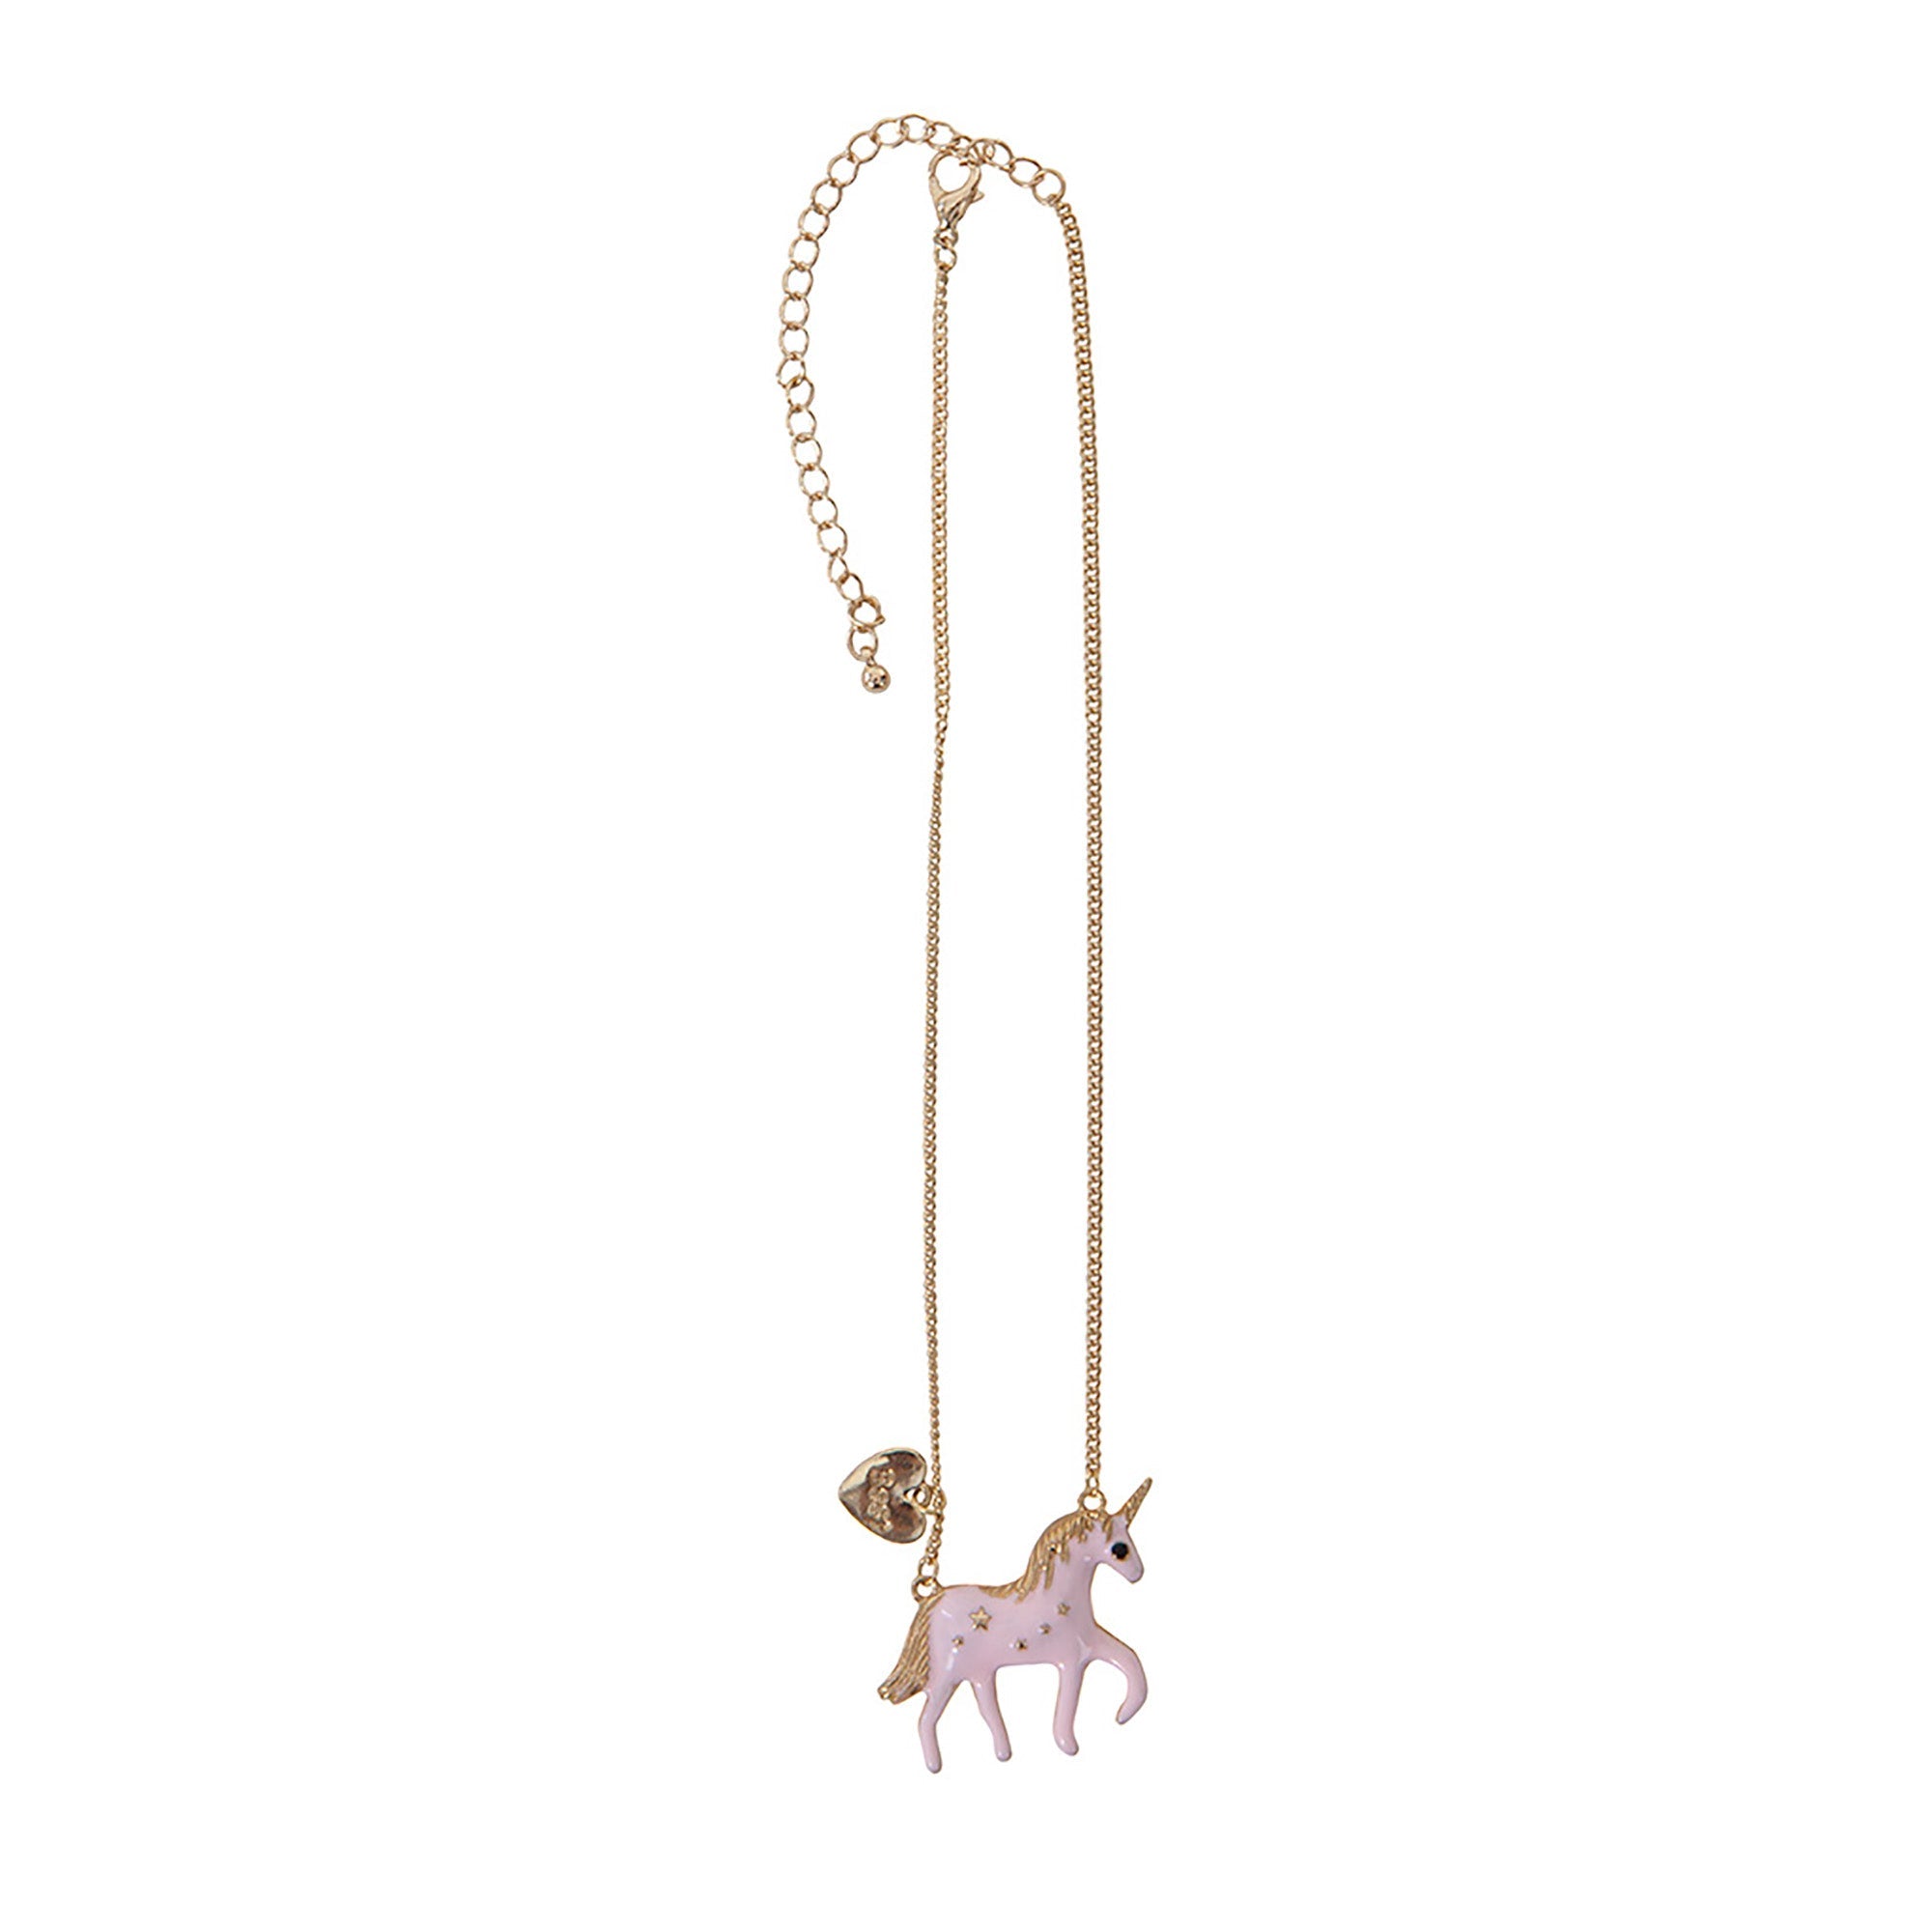 Kid's Jewelry Pink Unicorn Necklace with Gold Chain